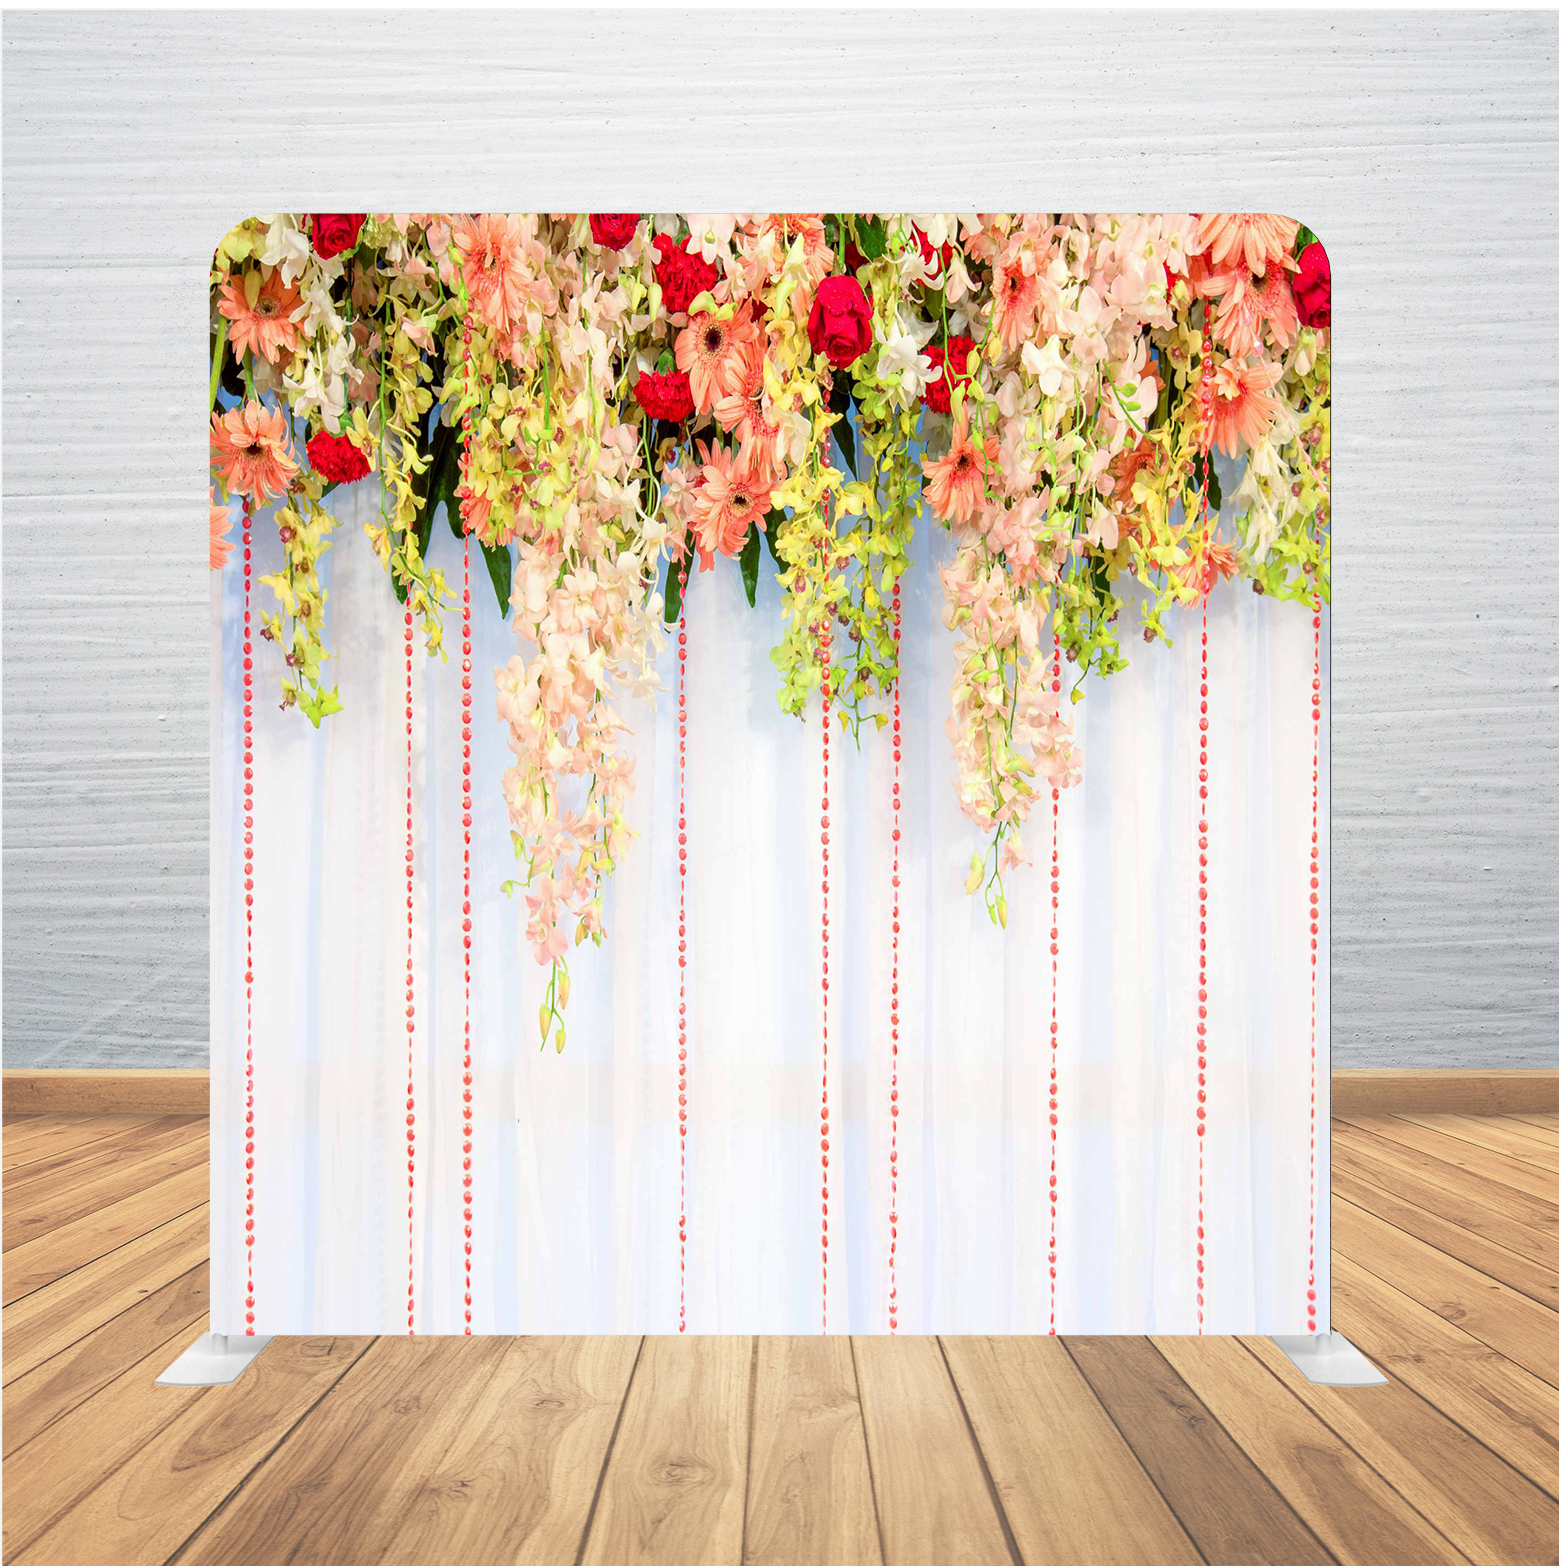 8X8 Pillowcase Tension Backdrop- Peach Flowers with Light Wood